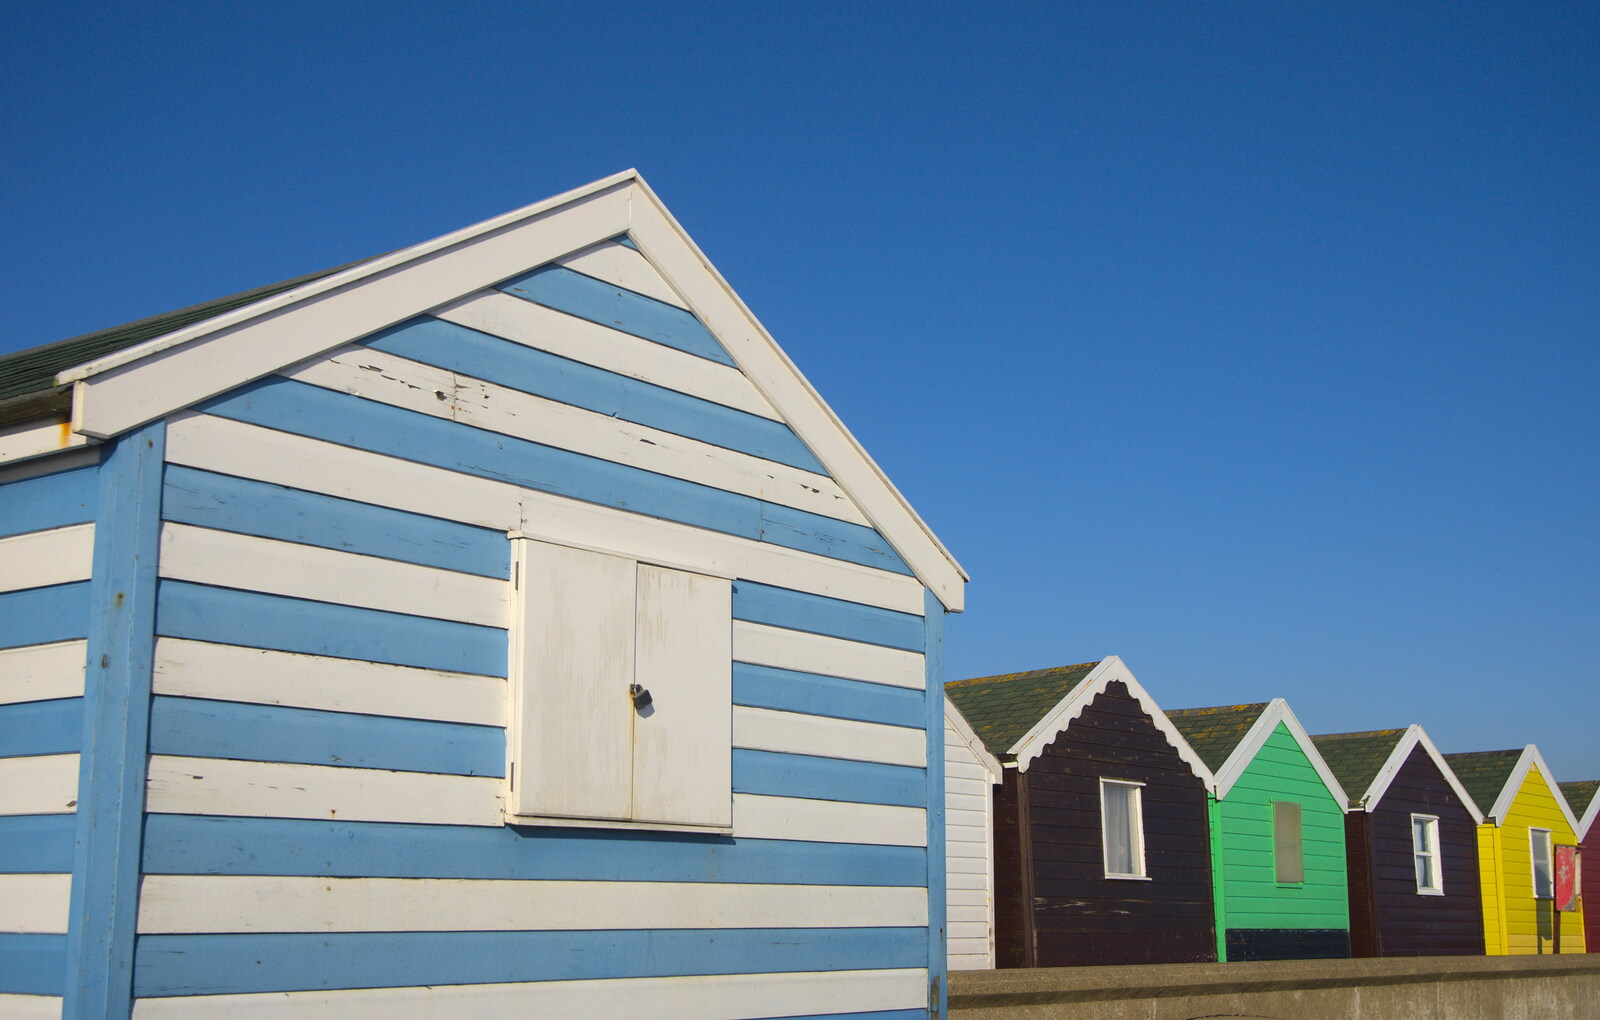 A stripey beach hut at Southwold from A Busy Day, Southwold and Thornham, Suffolk - 11th November 2012